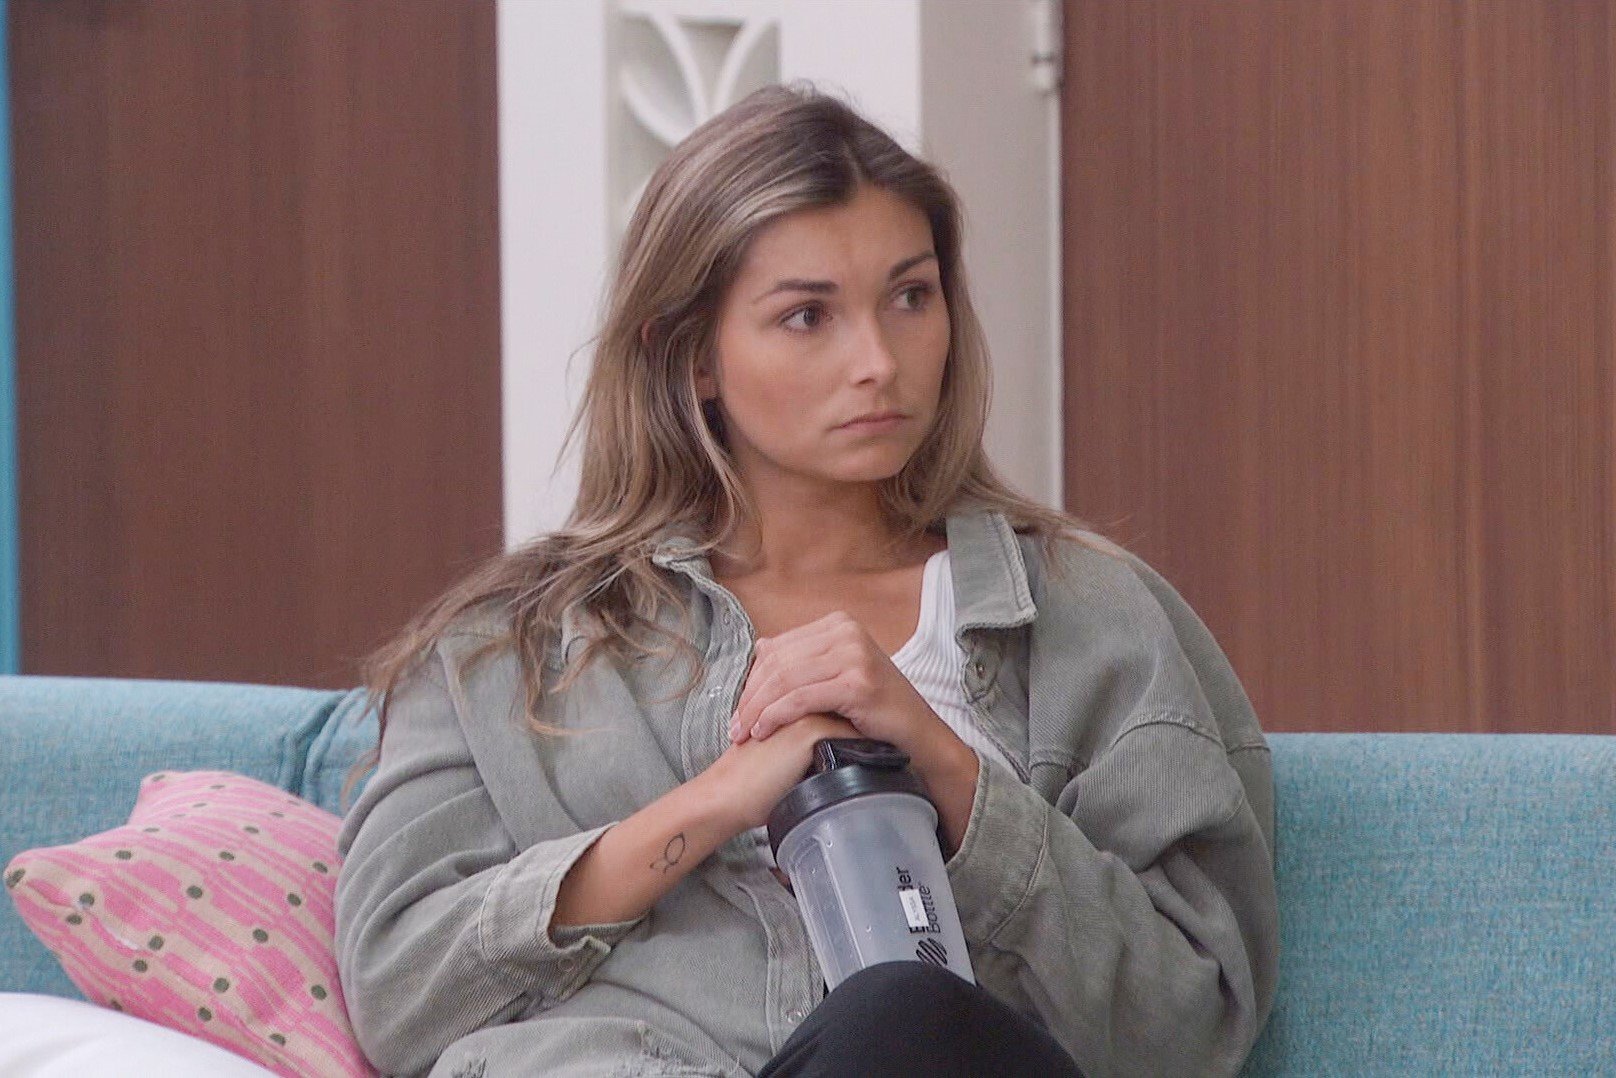 Alyssa Snider, who, according to 'Big Brother 24' spoilers, is on the block during week nine, wears a light green/gray jacket over a white tank top and black pants.